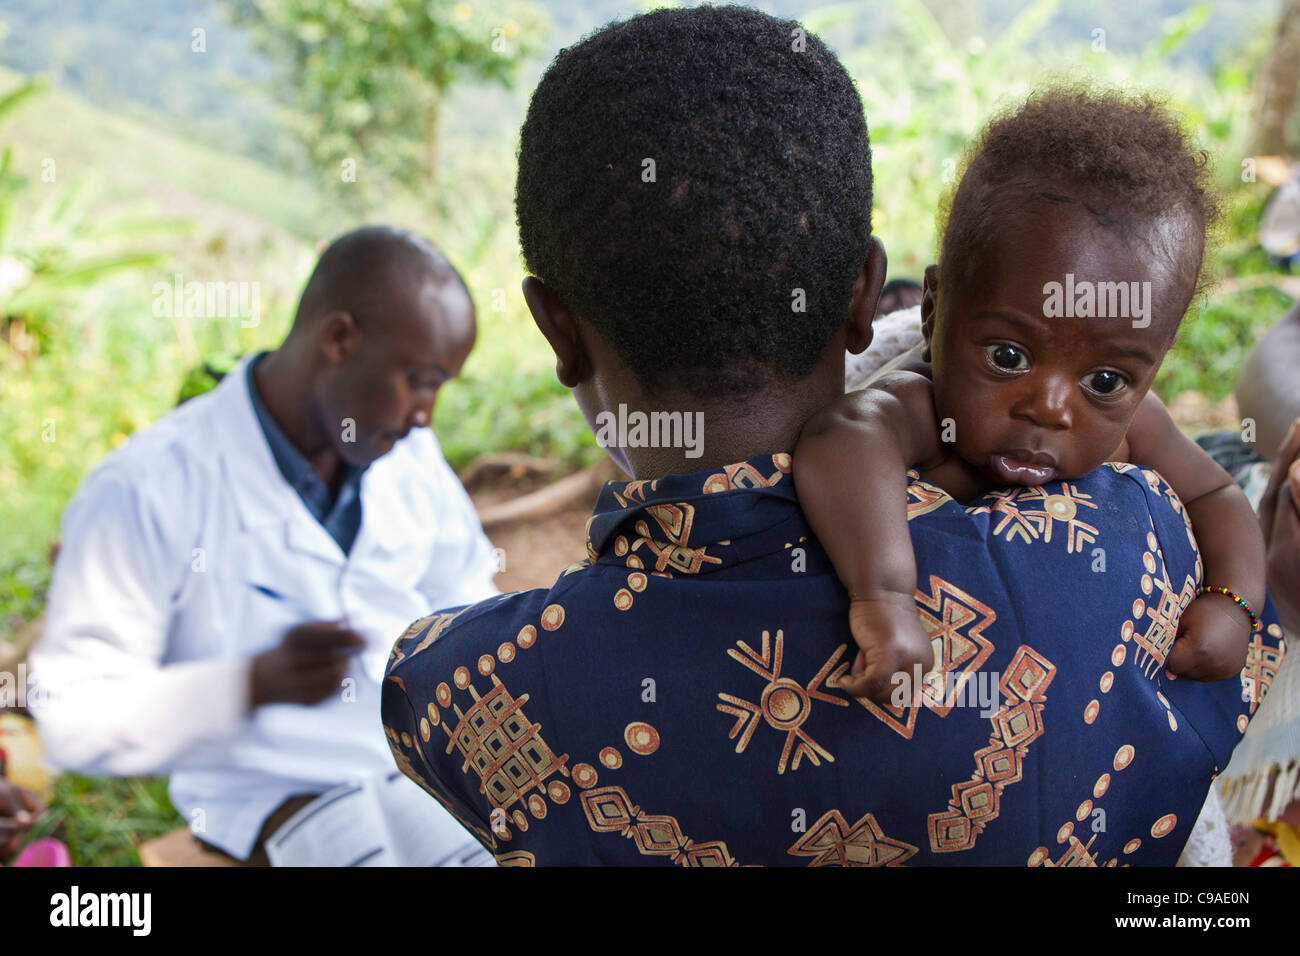 Women gather for health checks and to vaccinate their children. Bwindi Community hospital medical out reach clinic, Uganda. Stock Photo